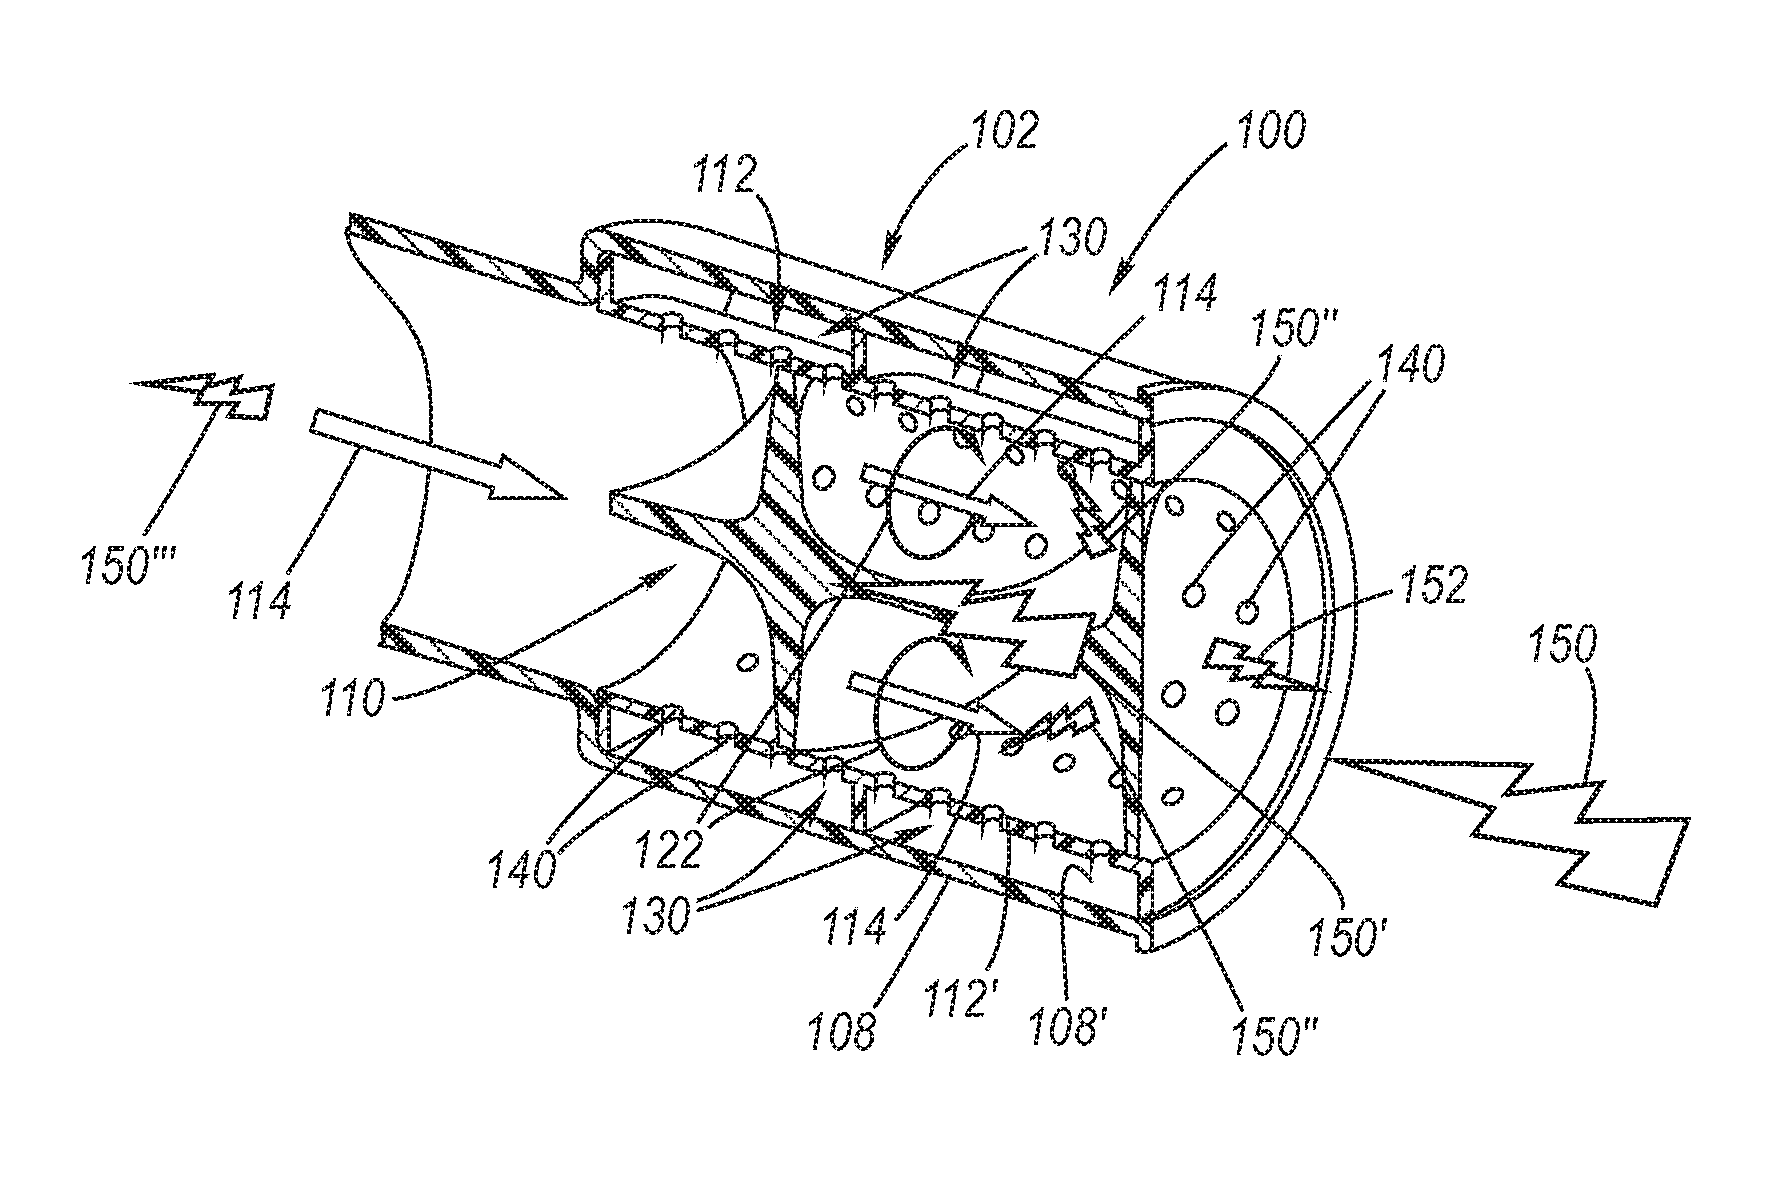 Induction system with air flow rotation and noise absorber for turbocharger applications